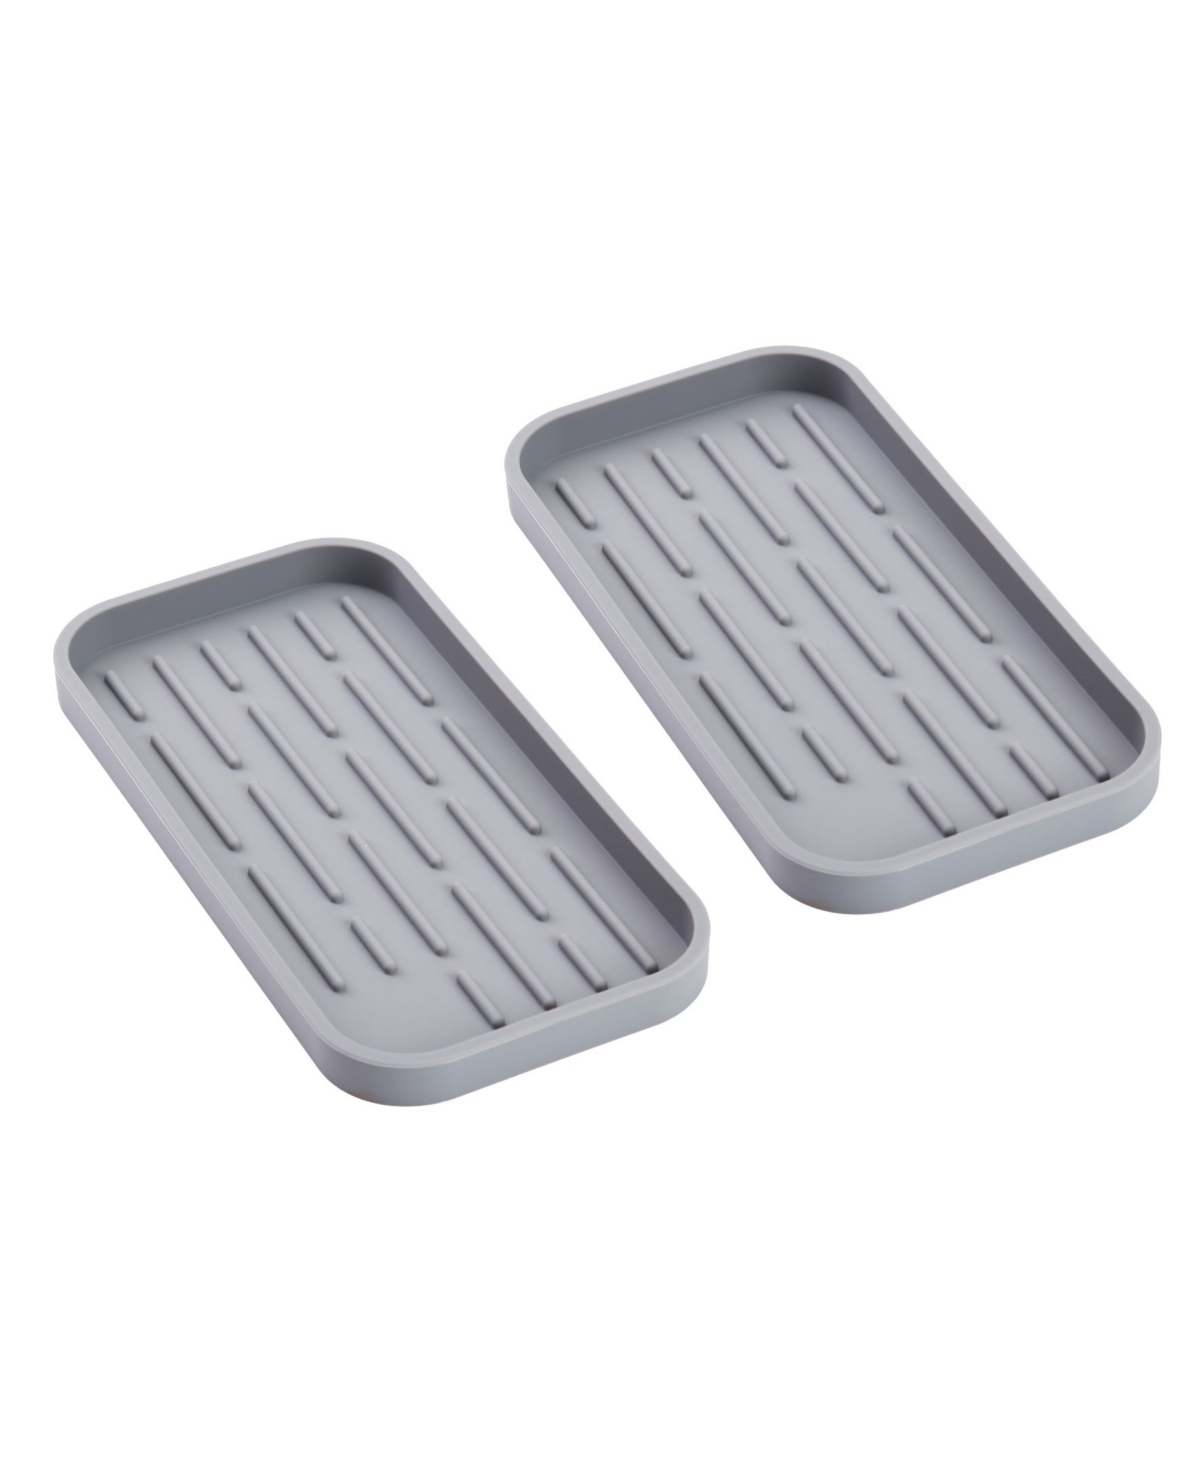 Cheer Collection Silicone Tray, Medium, 2 Pack In Gray